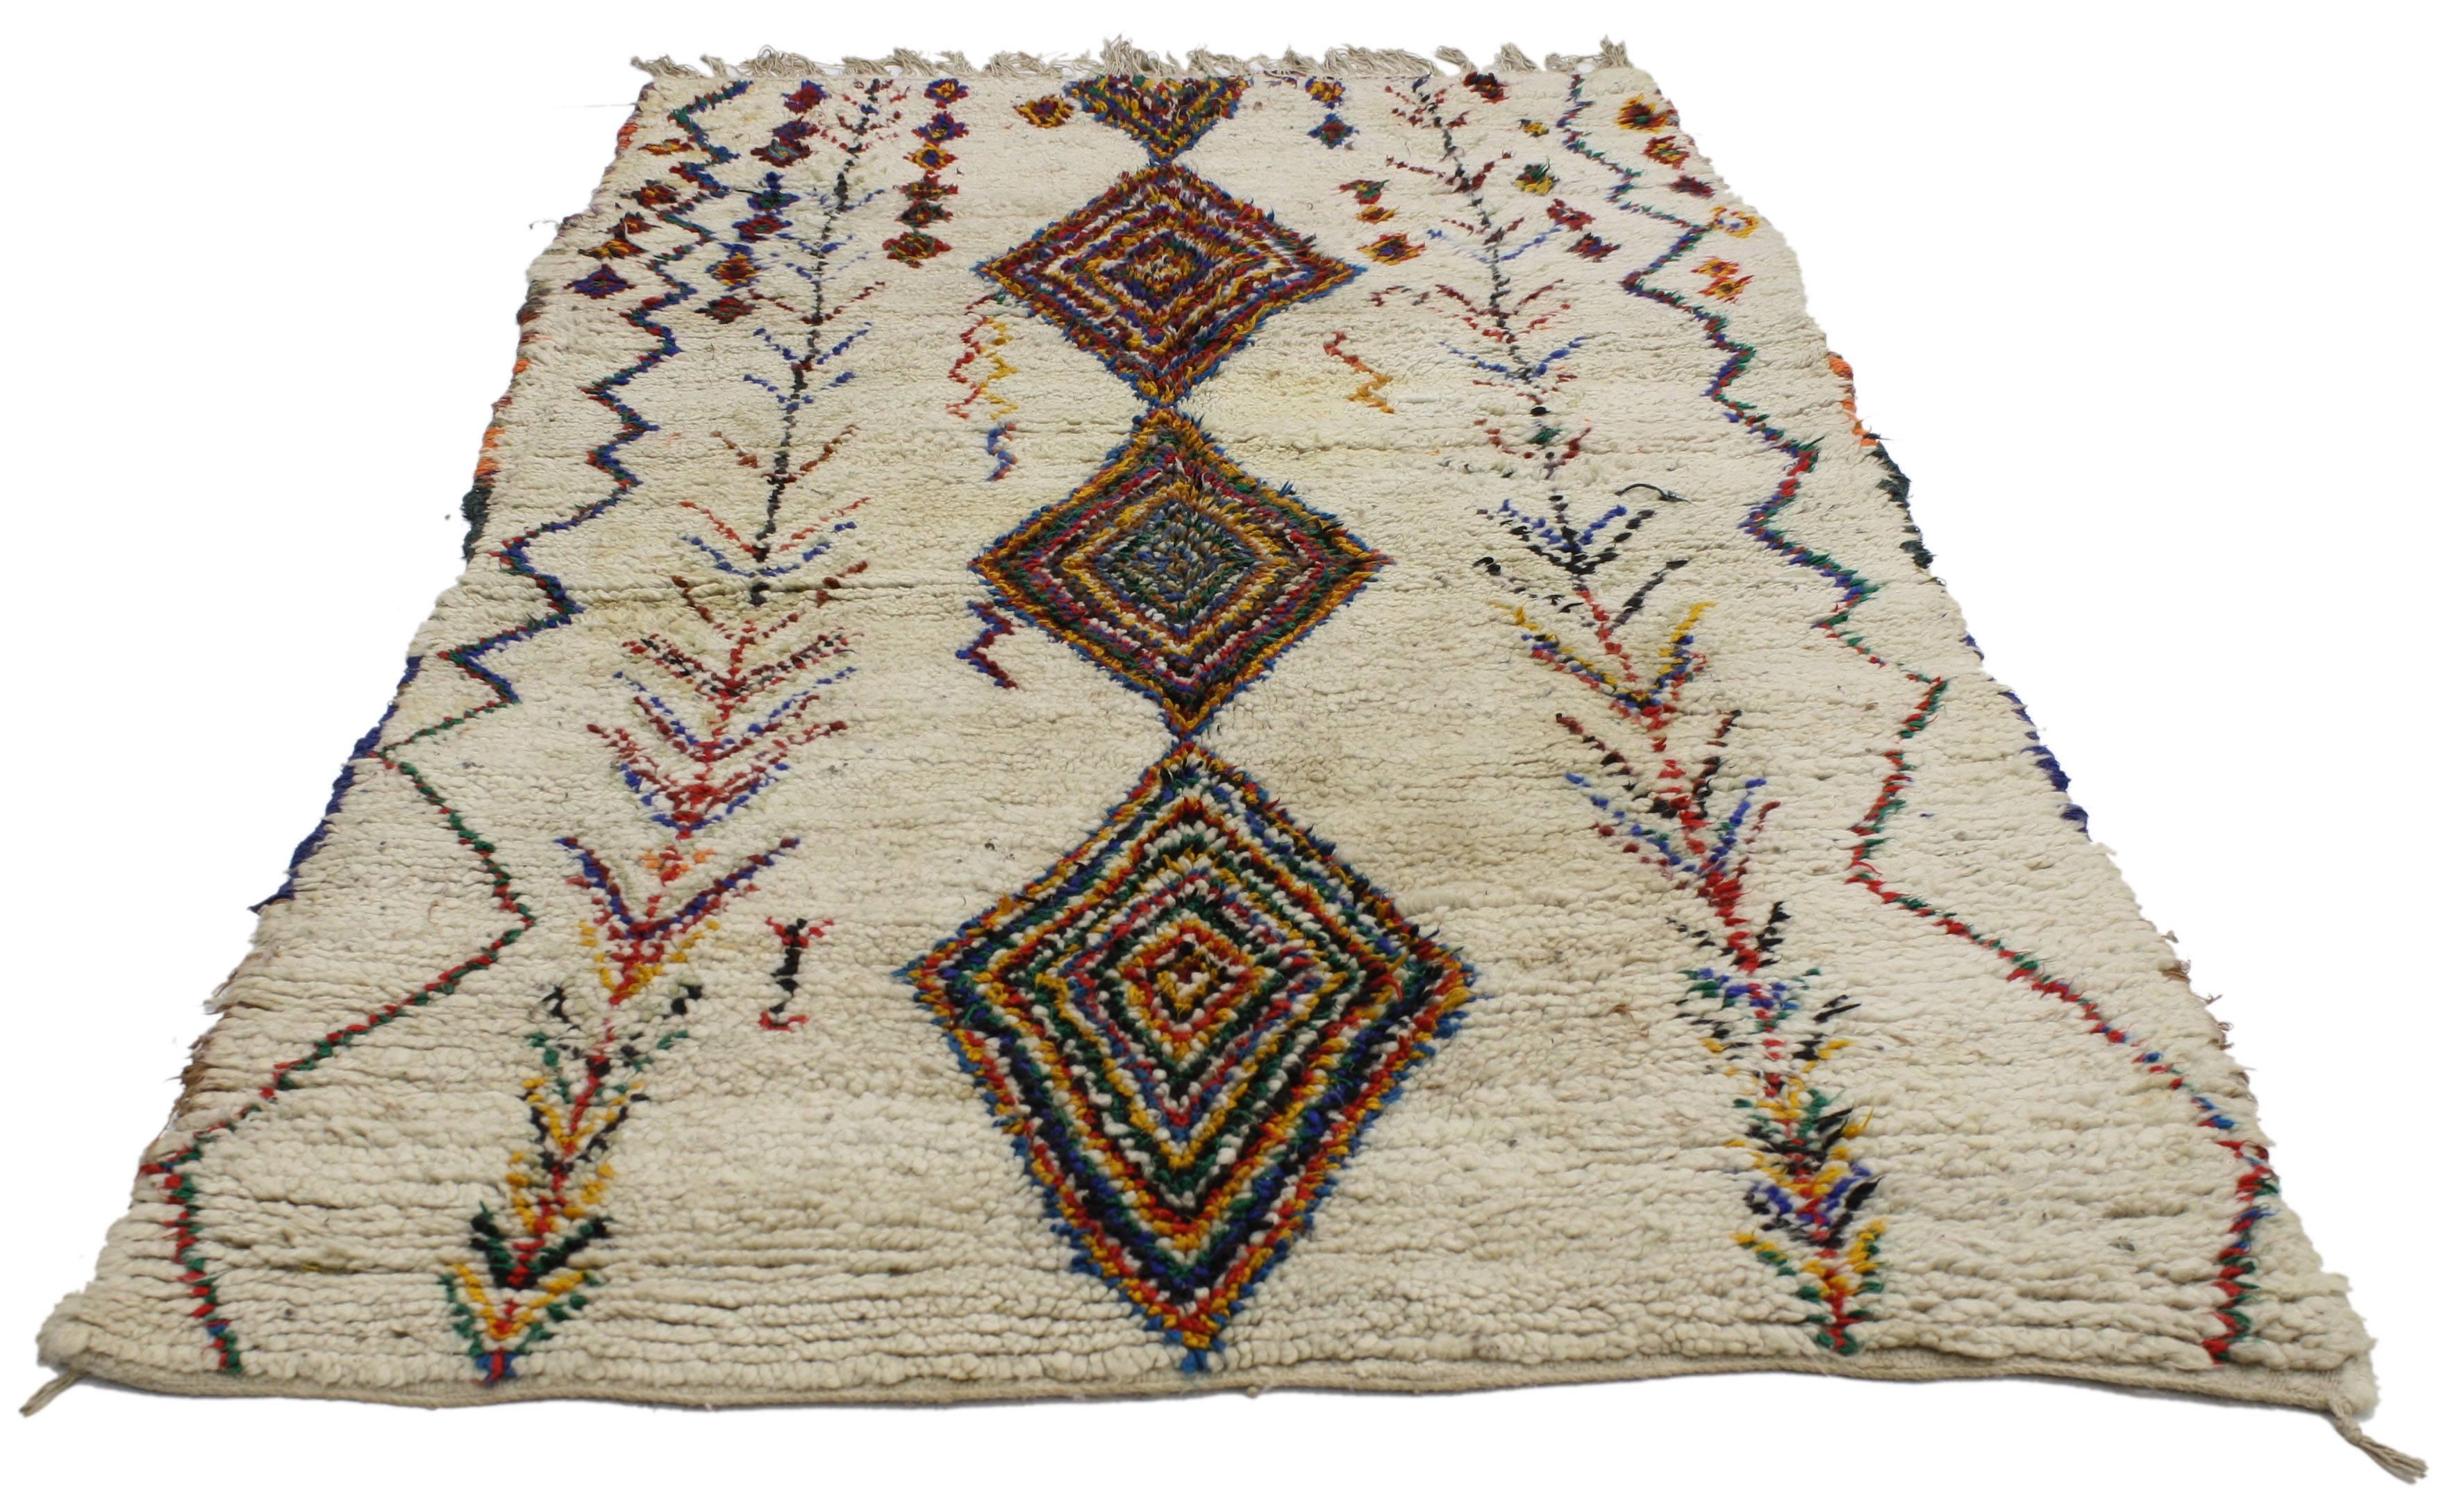 20624 Vintage Berber Moroccan Azilal rug with modern tribal style. Lacking a written language, Berber Tribe weavers incorporated ancestral myths into their textiles using archaic images and symbols. This vintage Berber Moroccan Azilal rug with